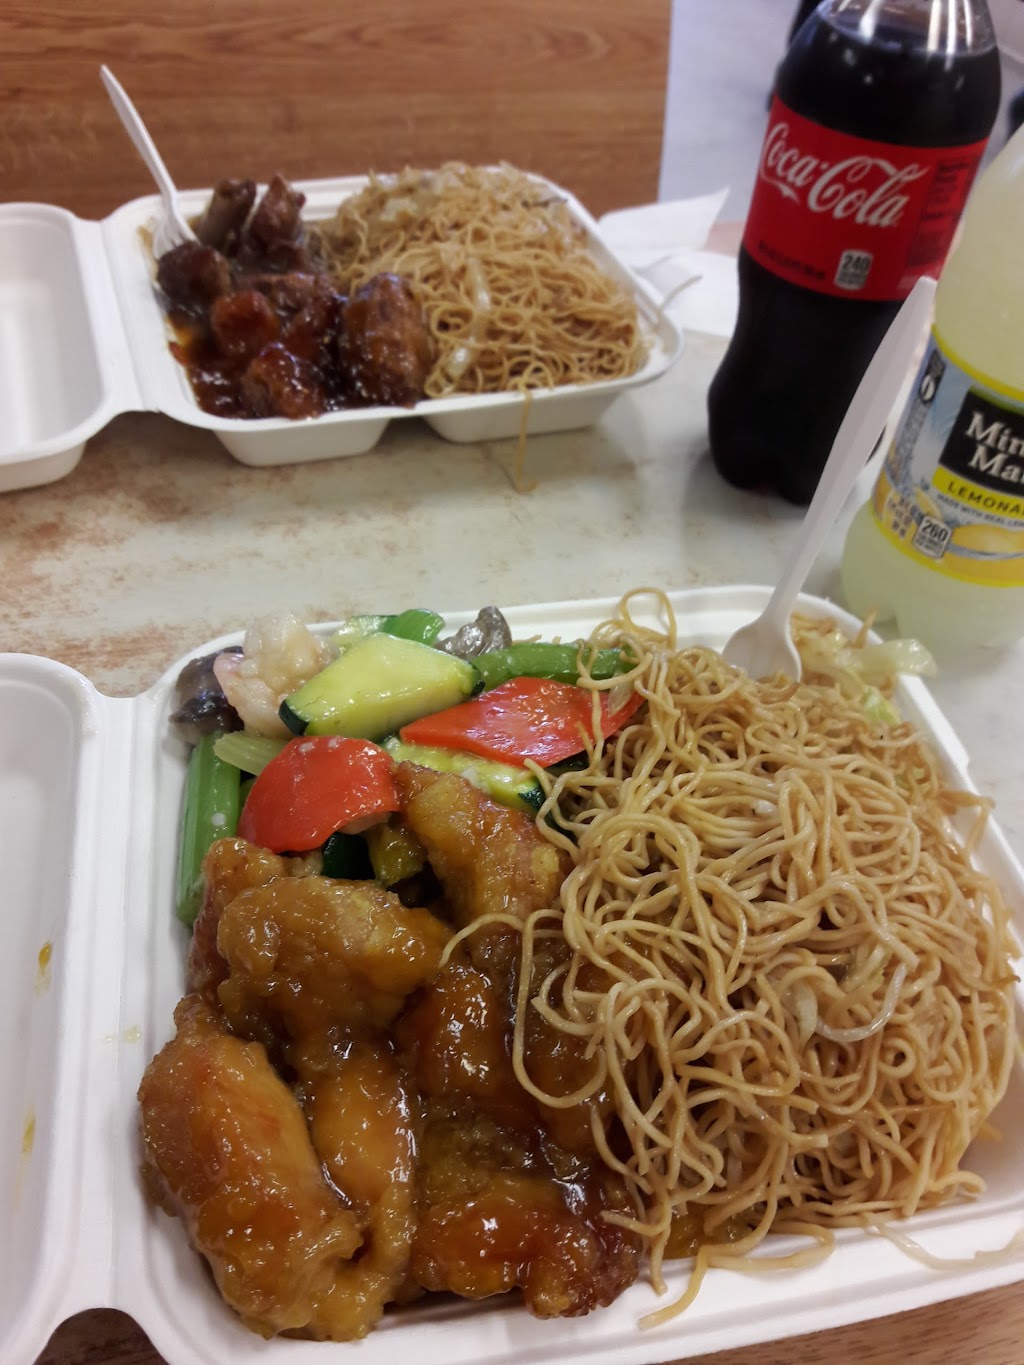 Best BBQ Chinese Food | 180 Greenhouse Marketplace, San Leandro, CA 94577 | Phone: (510) 483-8822